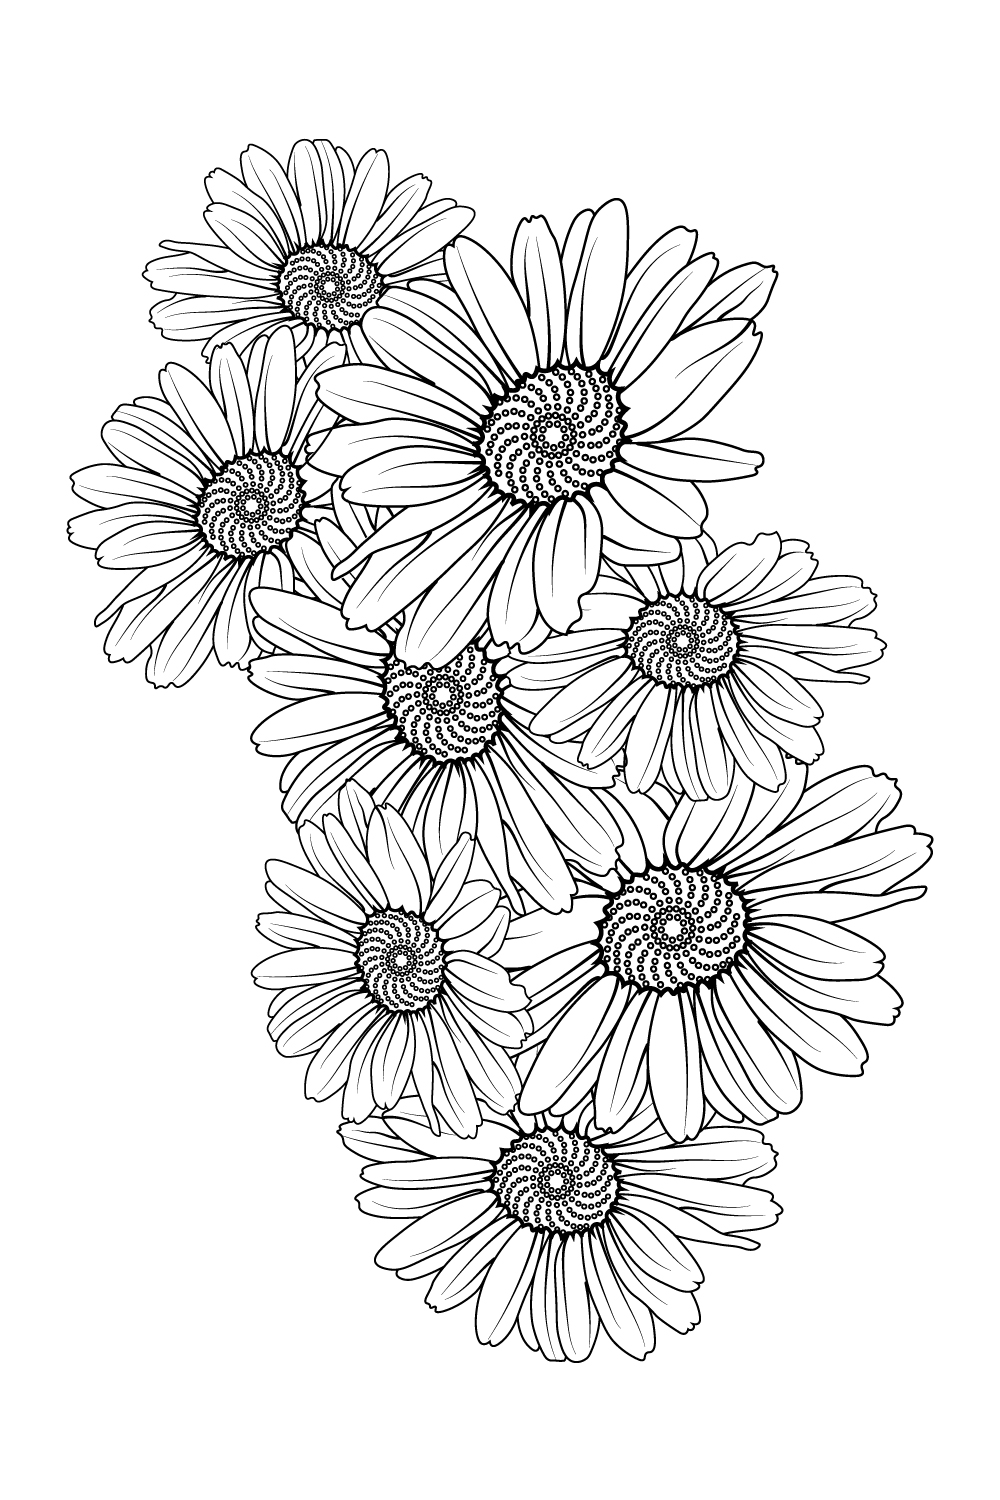 Daisy flower coloring pages, daisy flower bouquet tattoo, small daisy tattoo, elegant minimalist daisy tattoo, pinterest preview image.